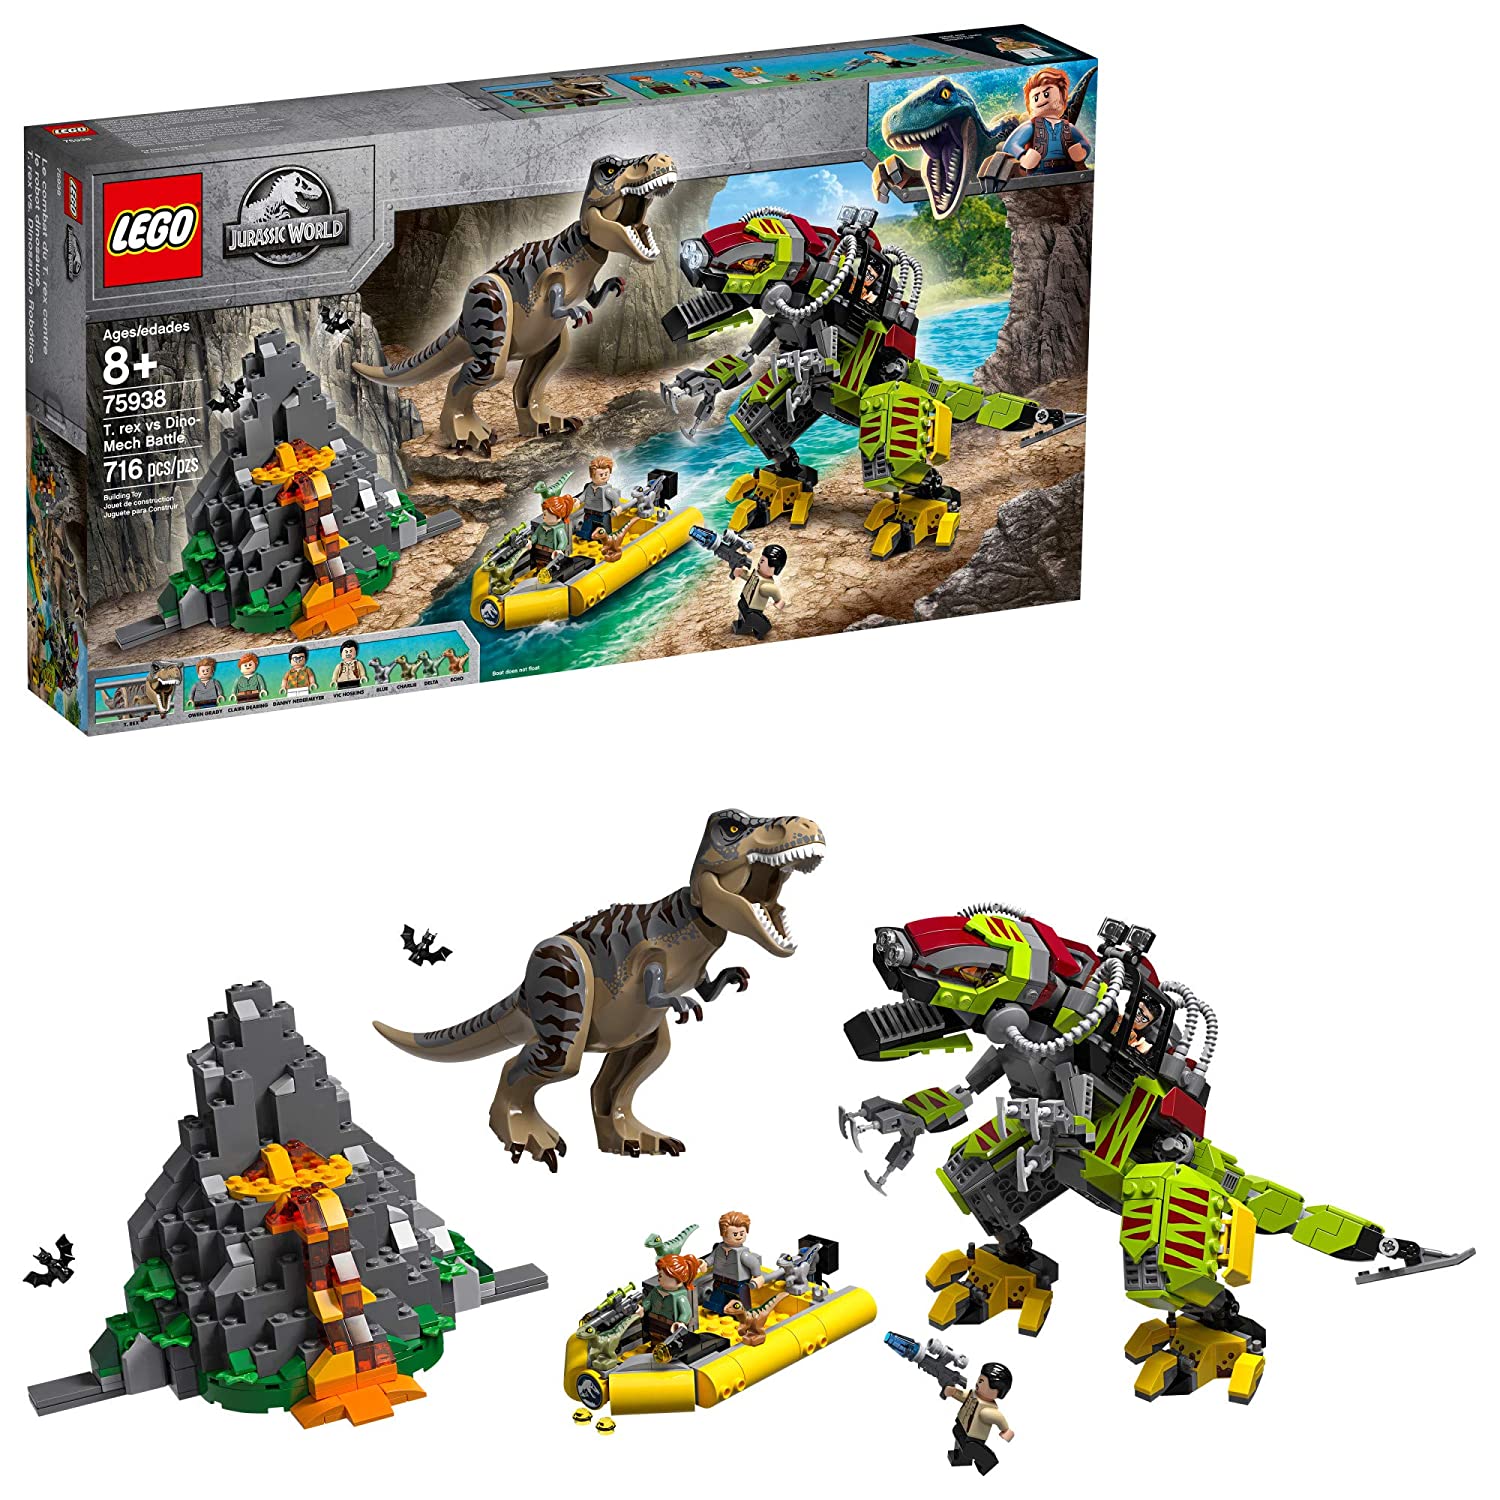 Top 8 Best Lego Dinosaurs Set Reviews in 2022 7